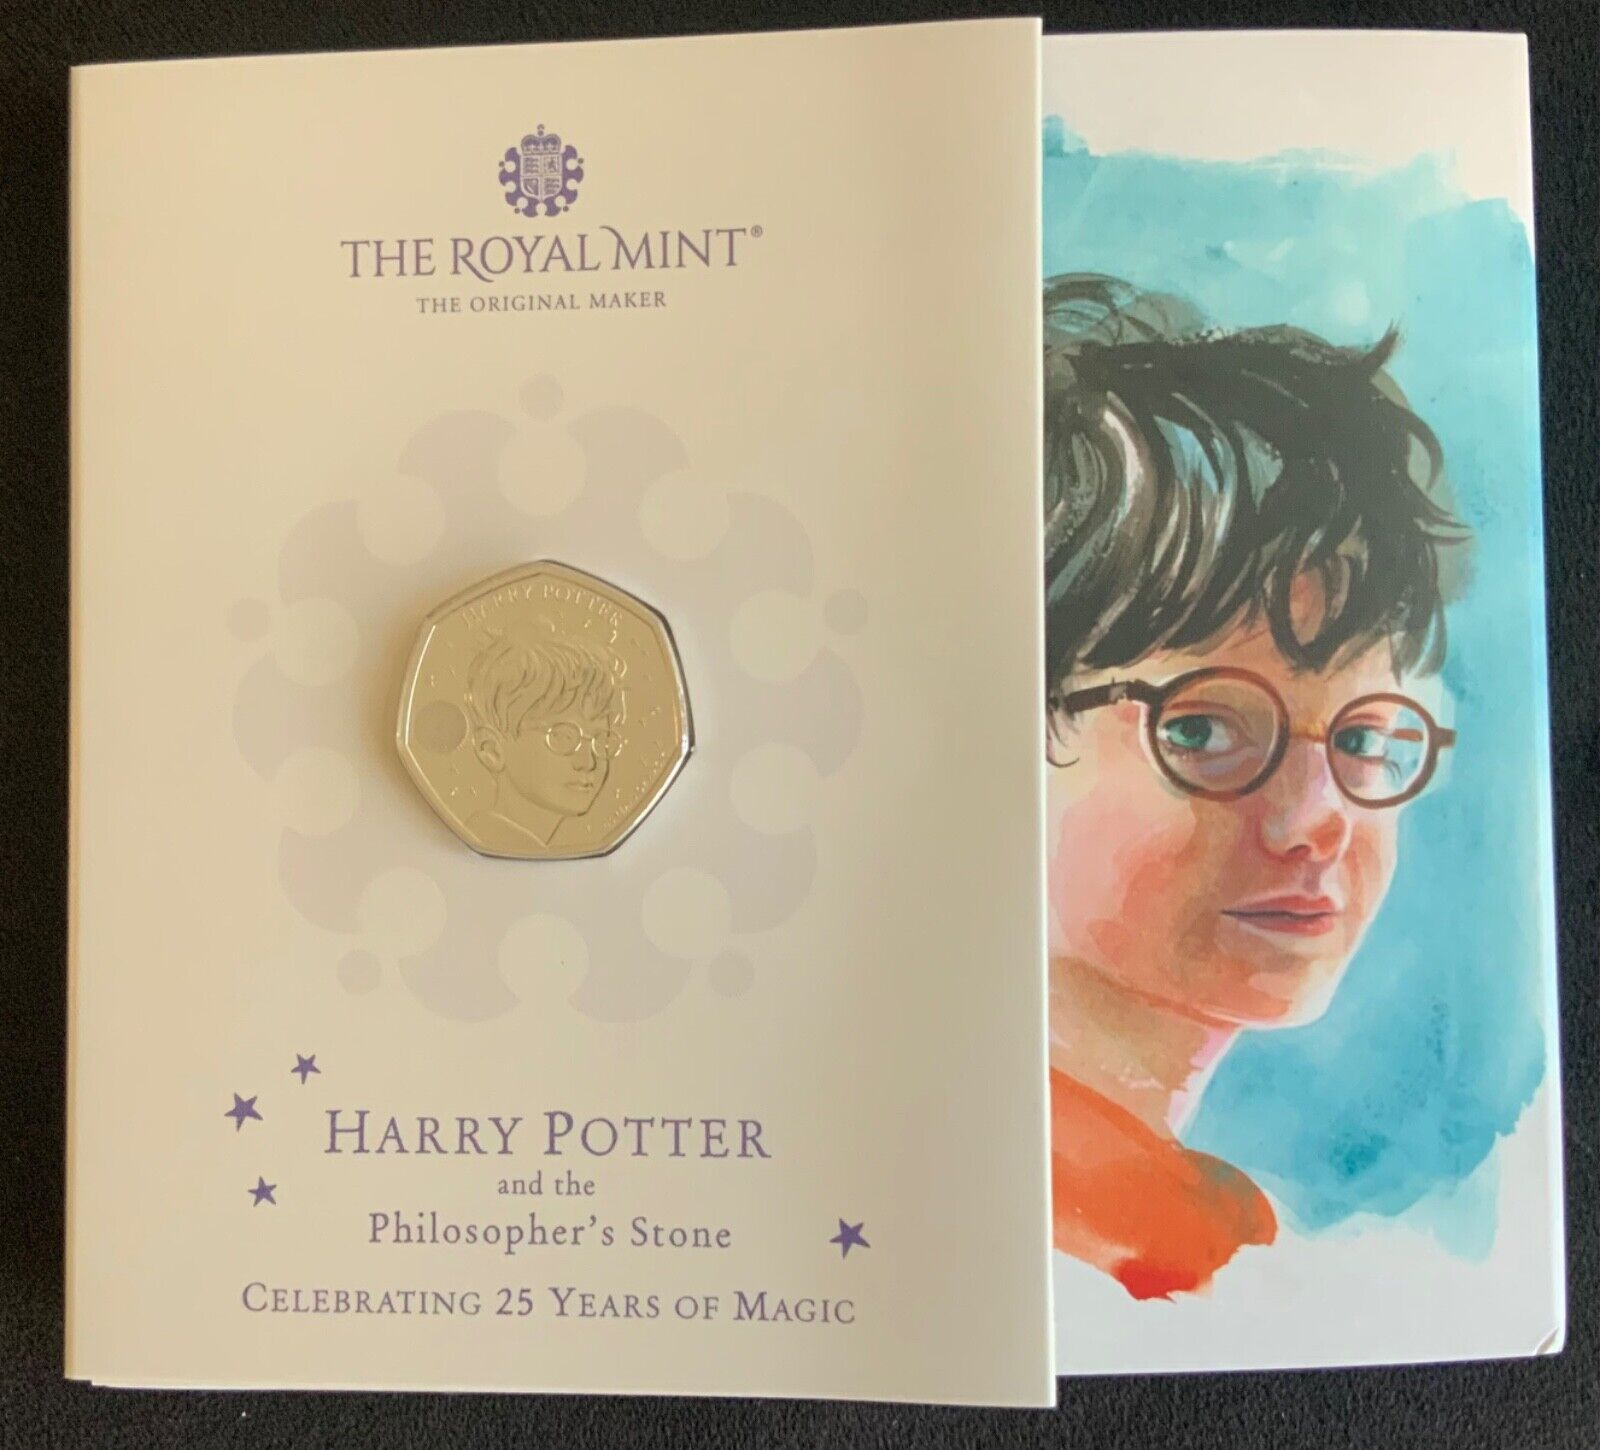 Harry Potter 2022 The Philosopher's Stone 25 Years 50p Pack Royal Mint Coin